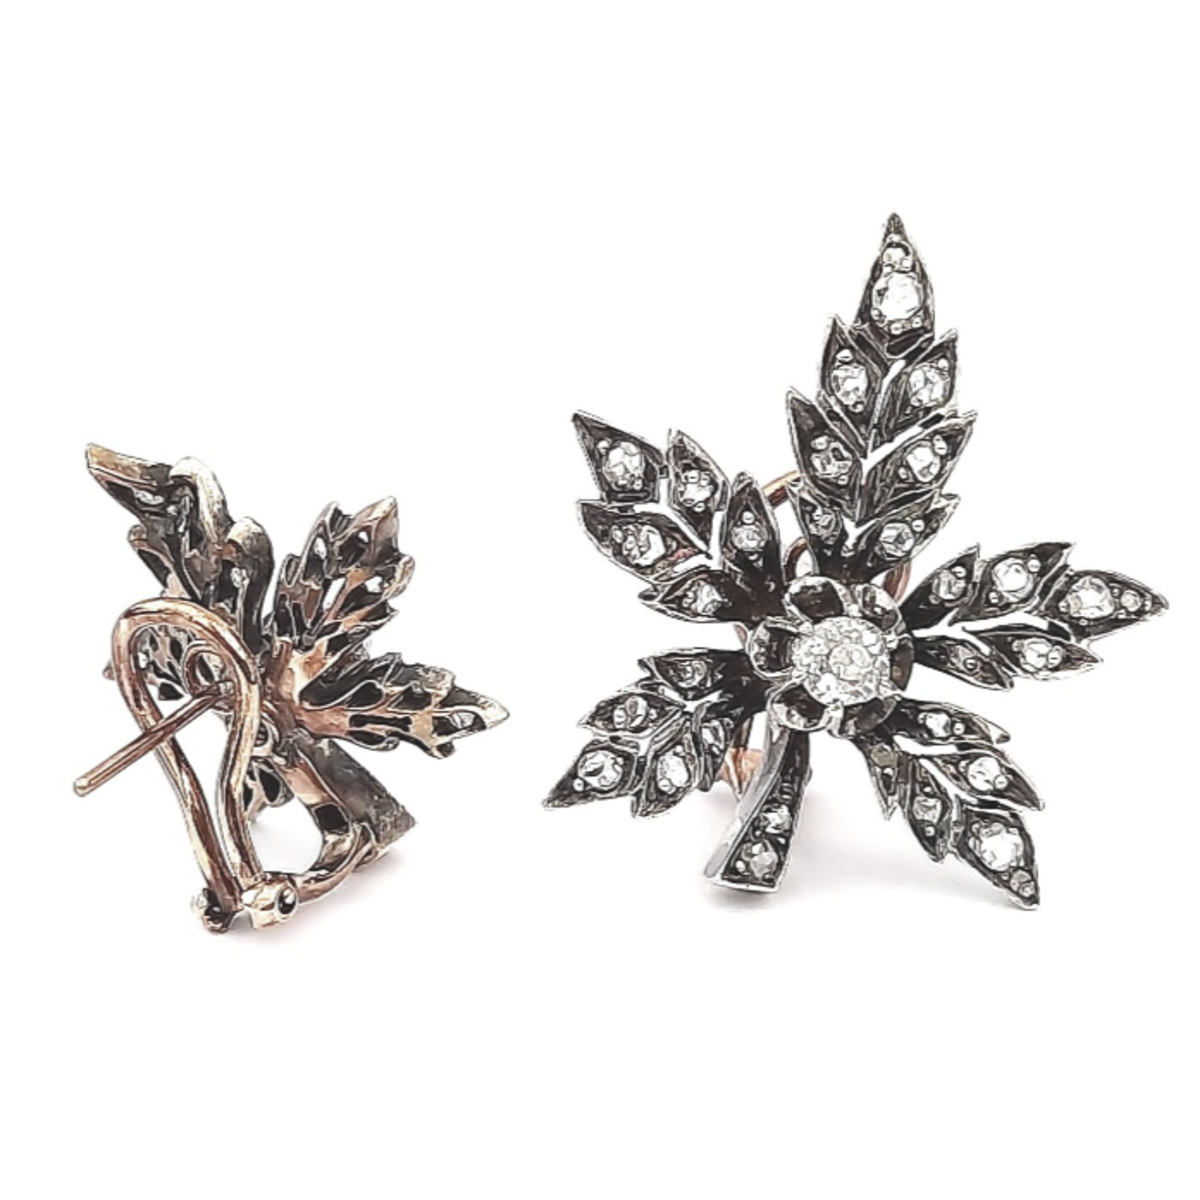 Antique Silver & Yellow Gold Diamond Floral Earrings back and front views